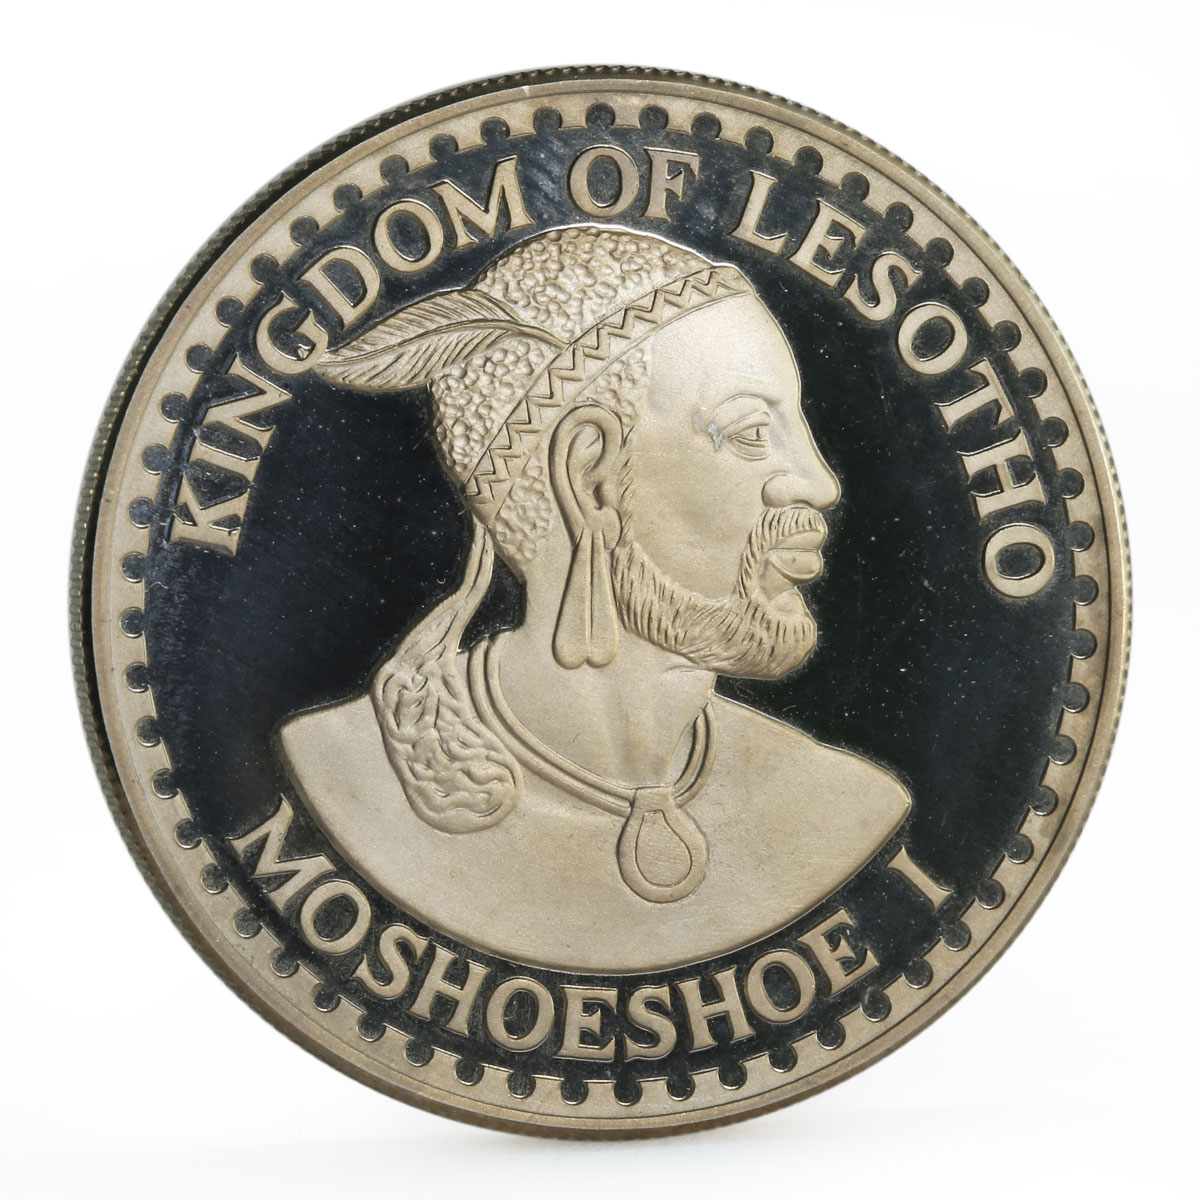 Lesotho 15 maloti Year of the Child PN11 trial essai nickel coin 1979